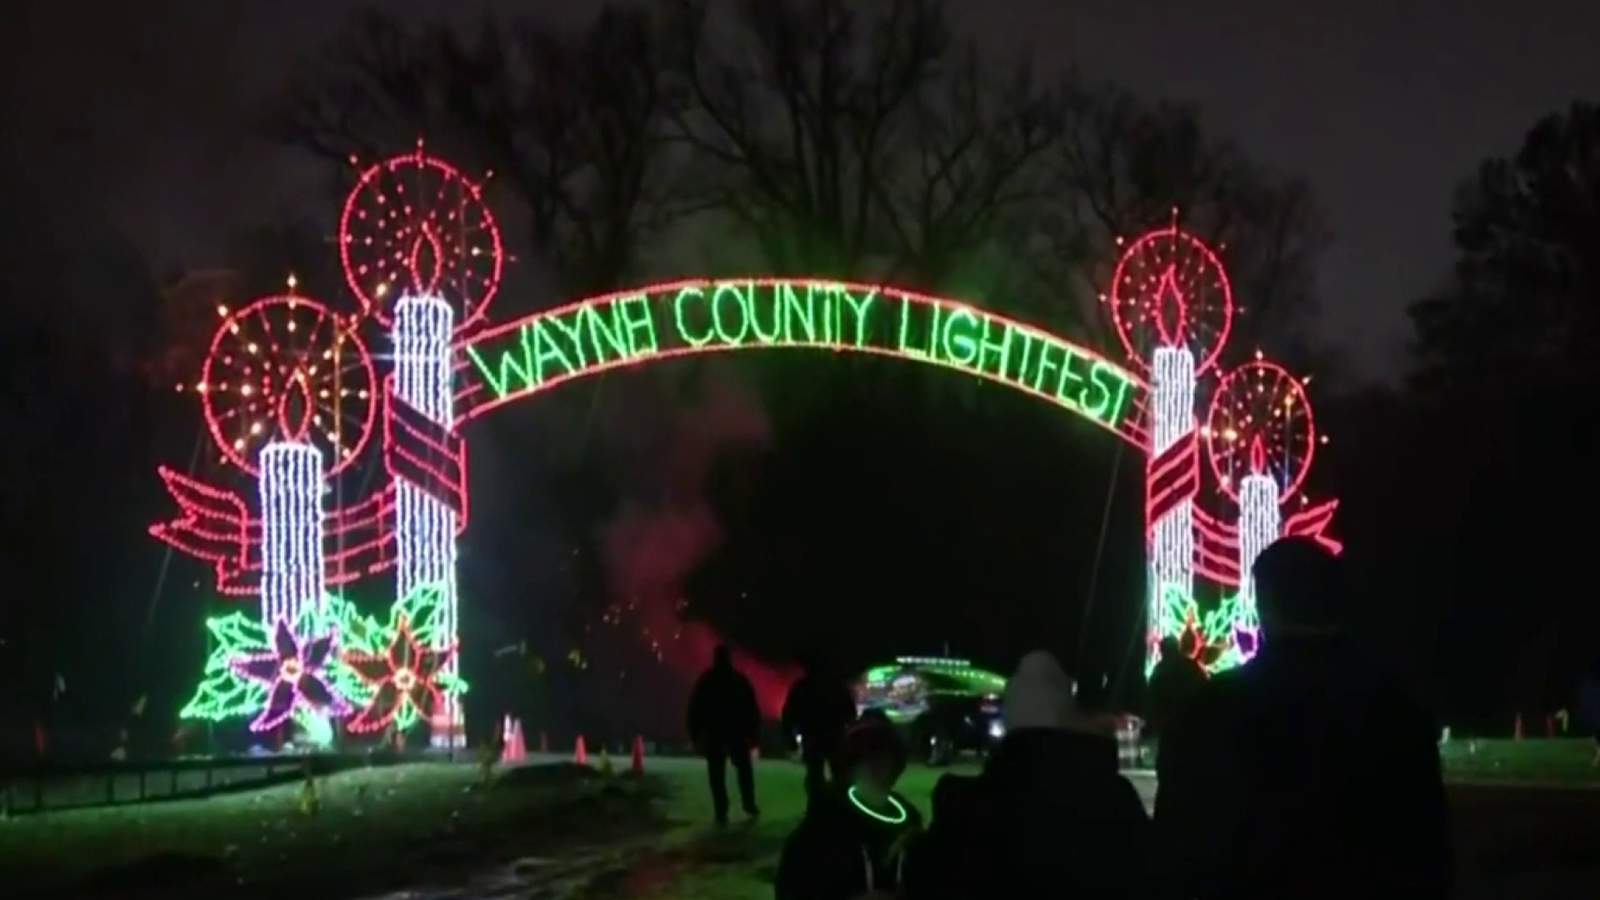 Wayne County Lightfest launches with a bang